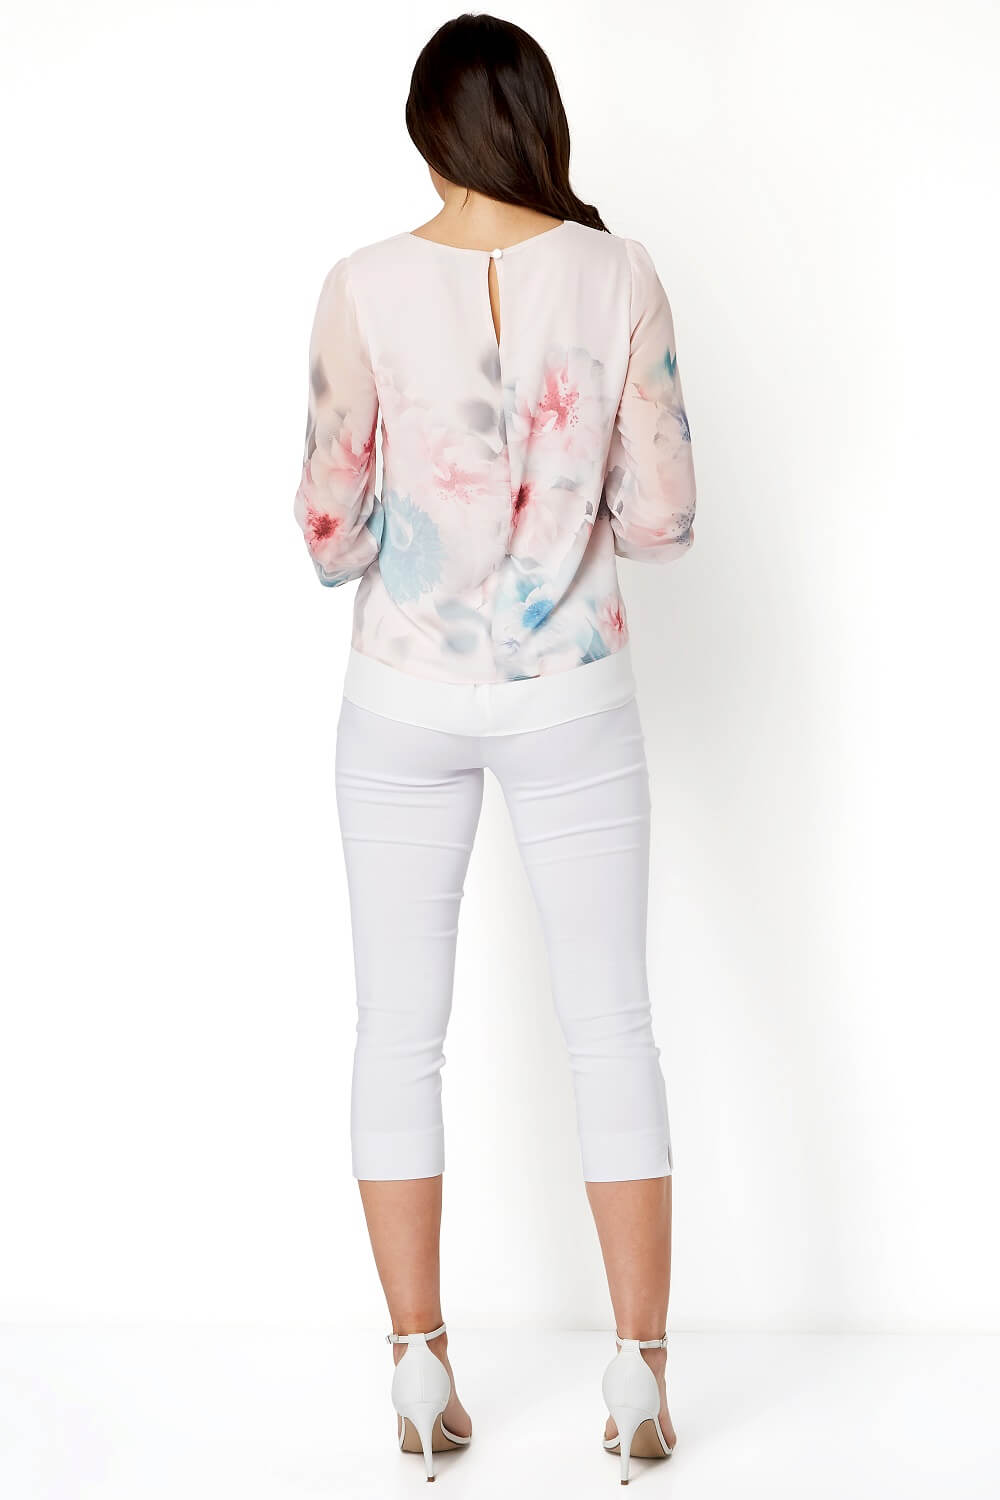 Light Pink Floral Overlay Top, Image 3 of 8